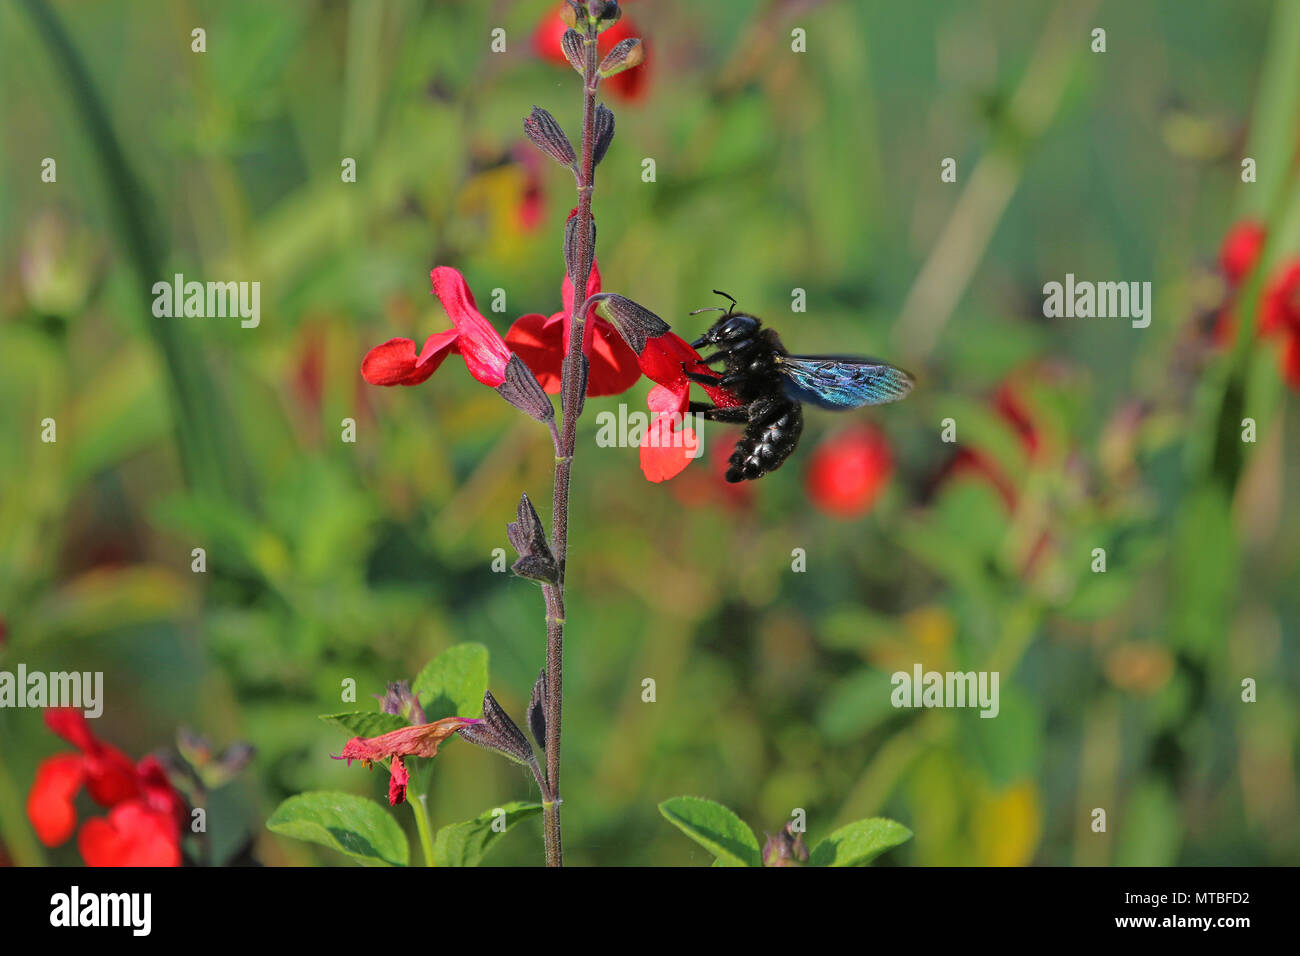 Carpenter bee Latin name xylocopa violacea feeding on scarlet flowering sage royal bumble or salvia x-jamensis close to blooming in Italy in spring Stock Photo